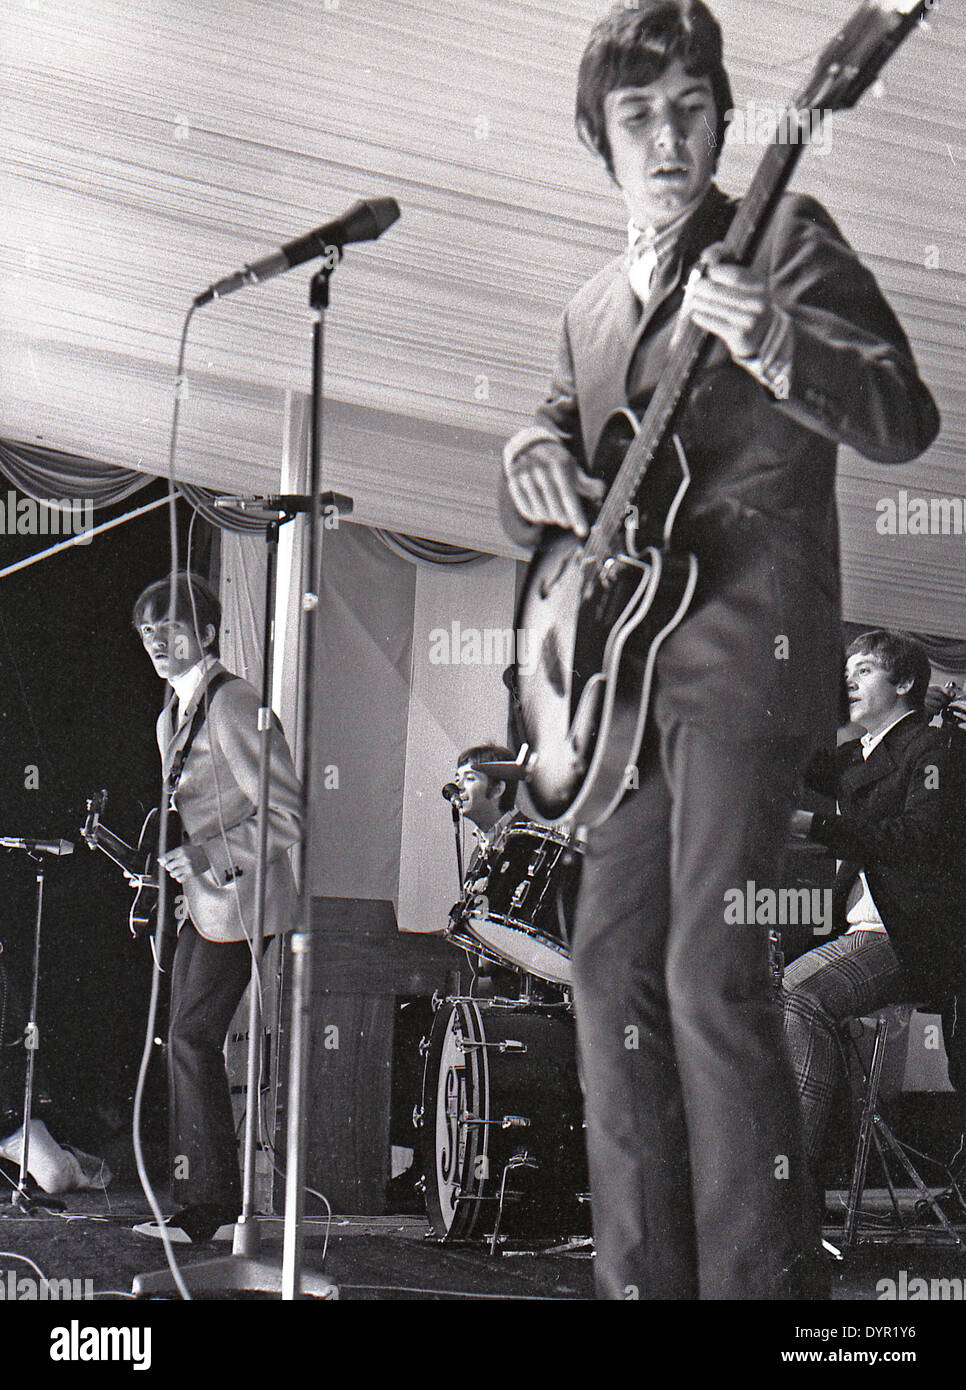 SMALL FACES pop group at Windsor Jazz & Blues Festival, England, 11 August 1967. From left: Marriott, McLagan, Lane, Jones Stock Photo